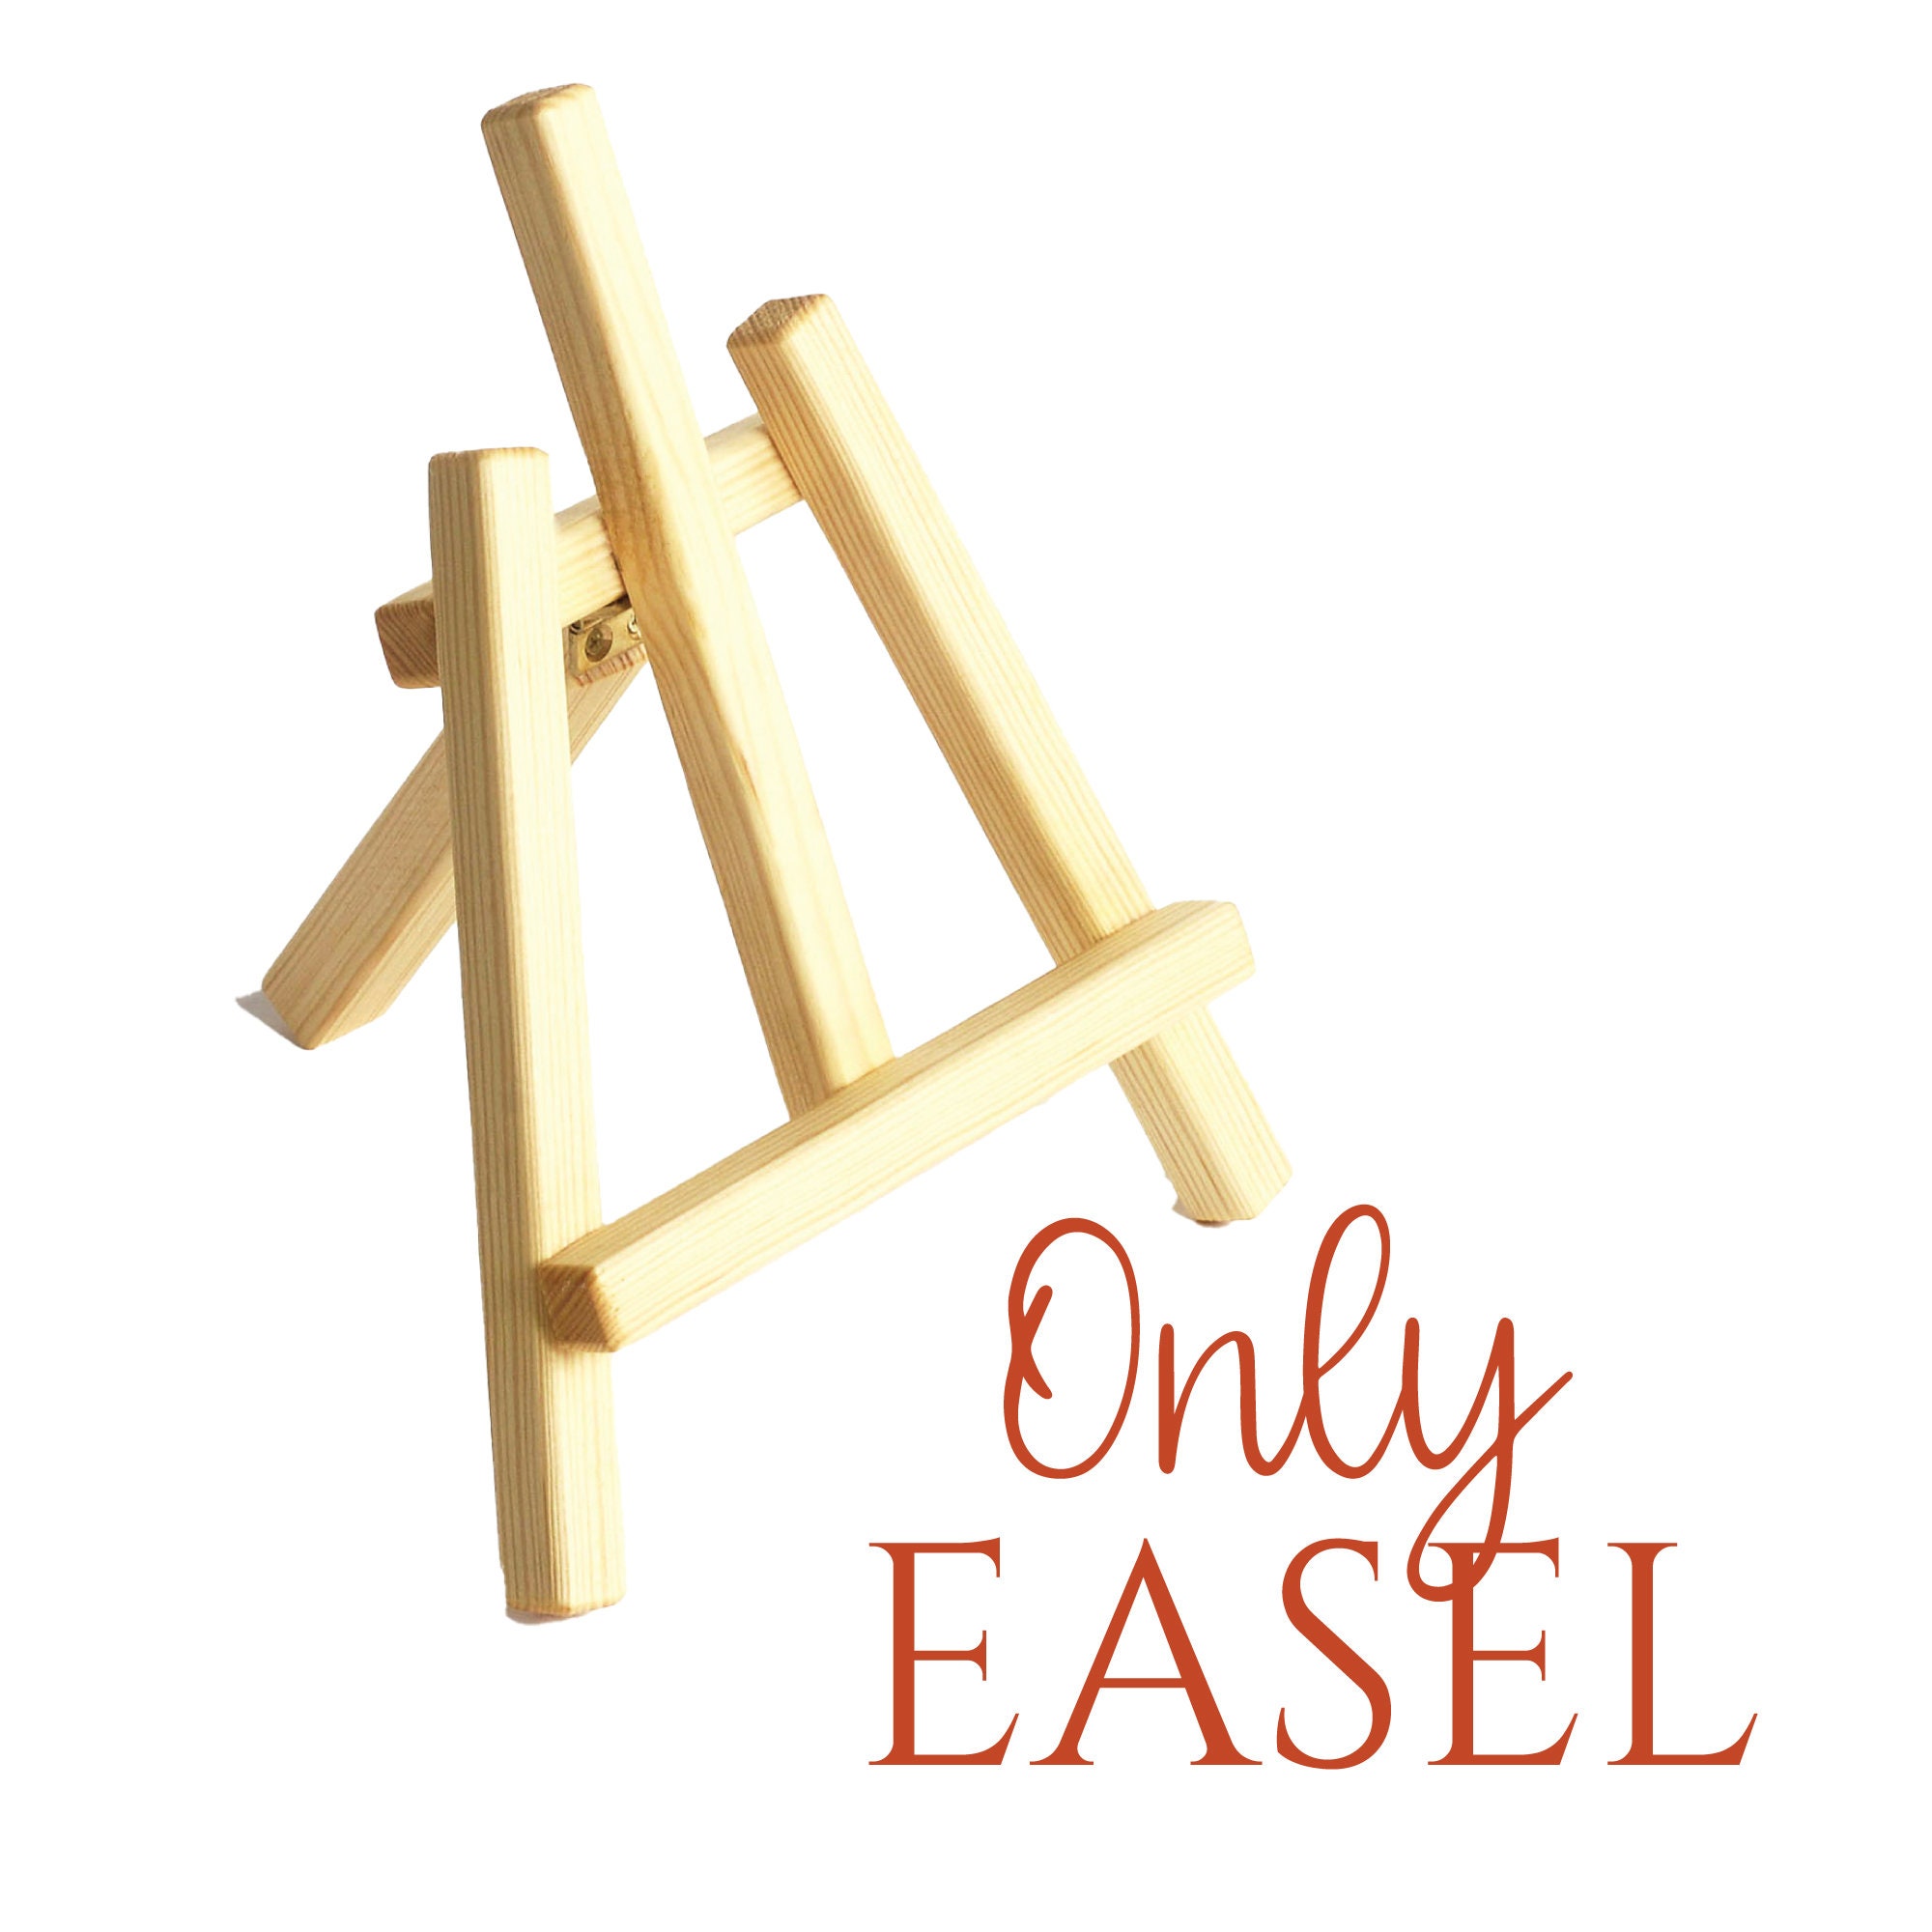 SET OF SIX WIRE EASELS 6-INCH WITH RUBBER TIPS NEW HOME DECOR PICTURE STANDS